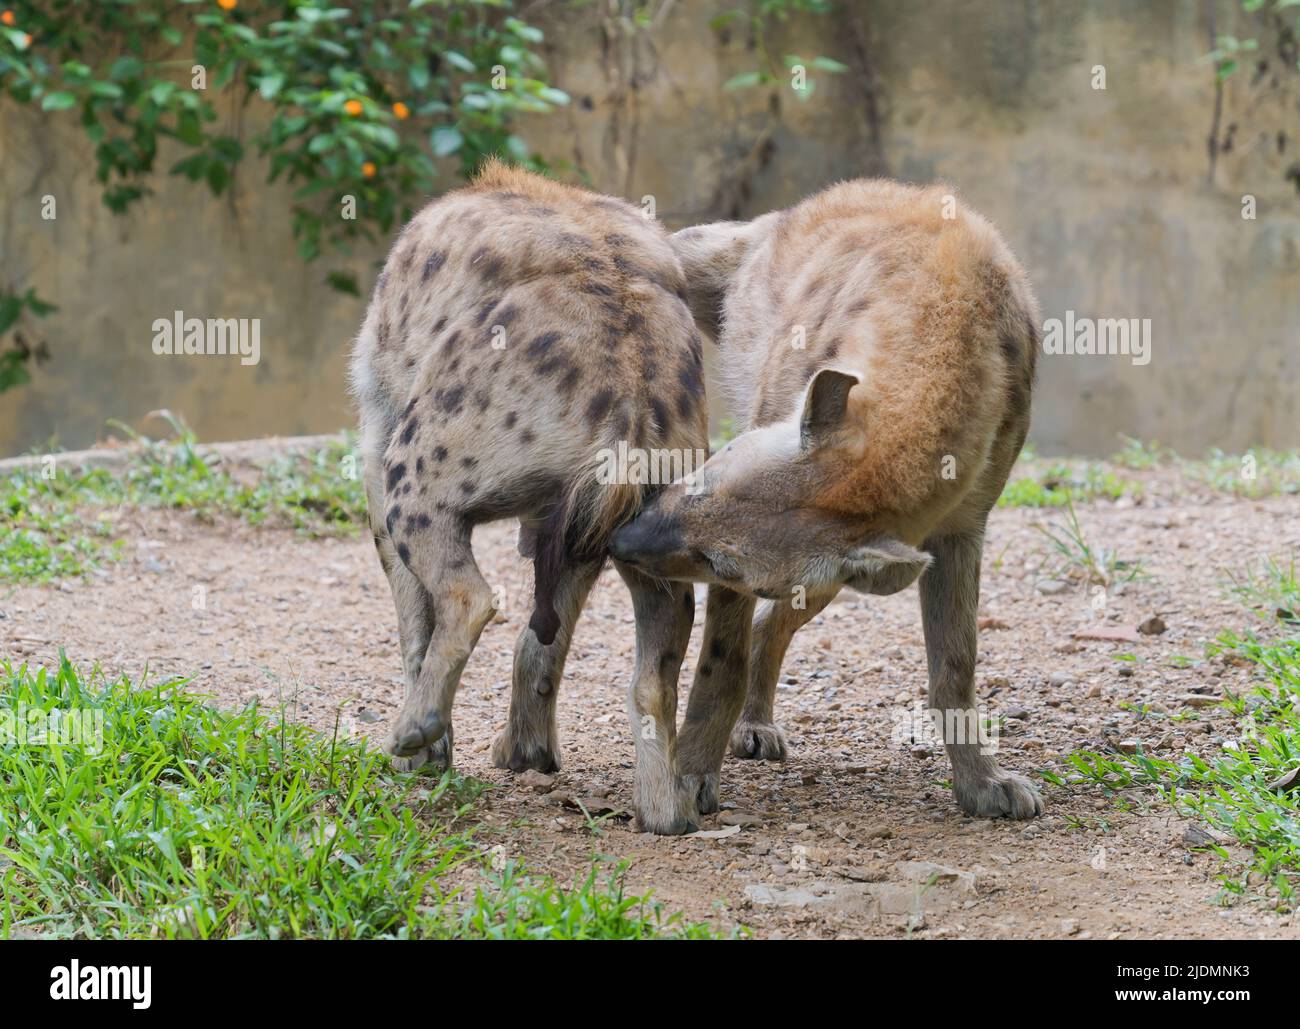 Adult spotted hyena at zoo Stock Photo